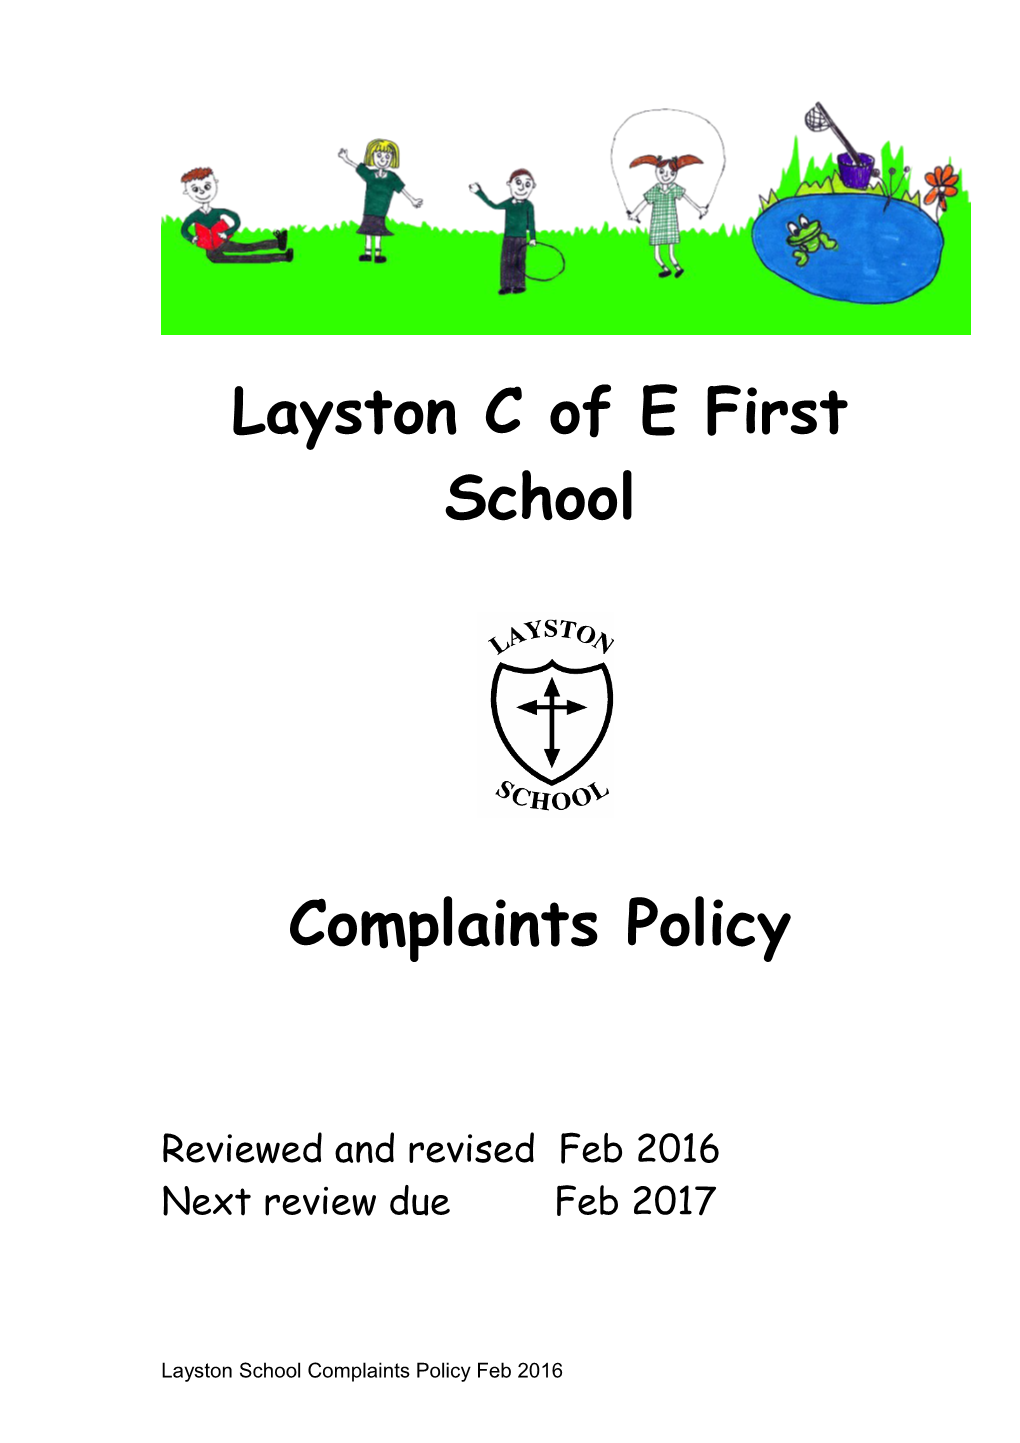 Layston C of E First School